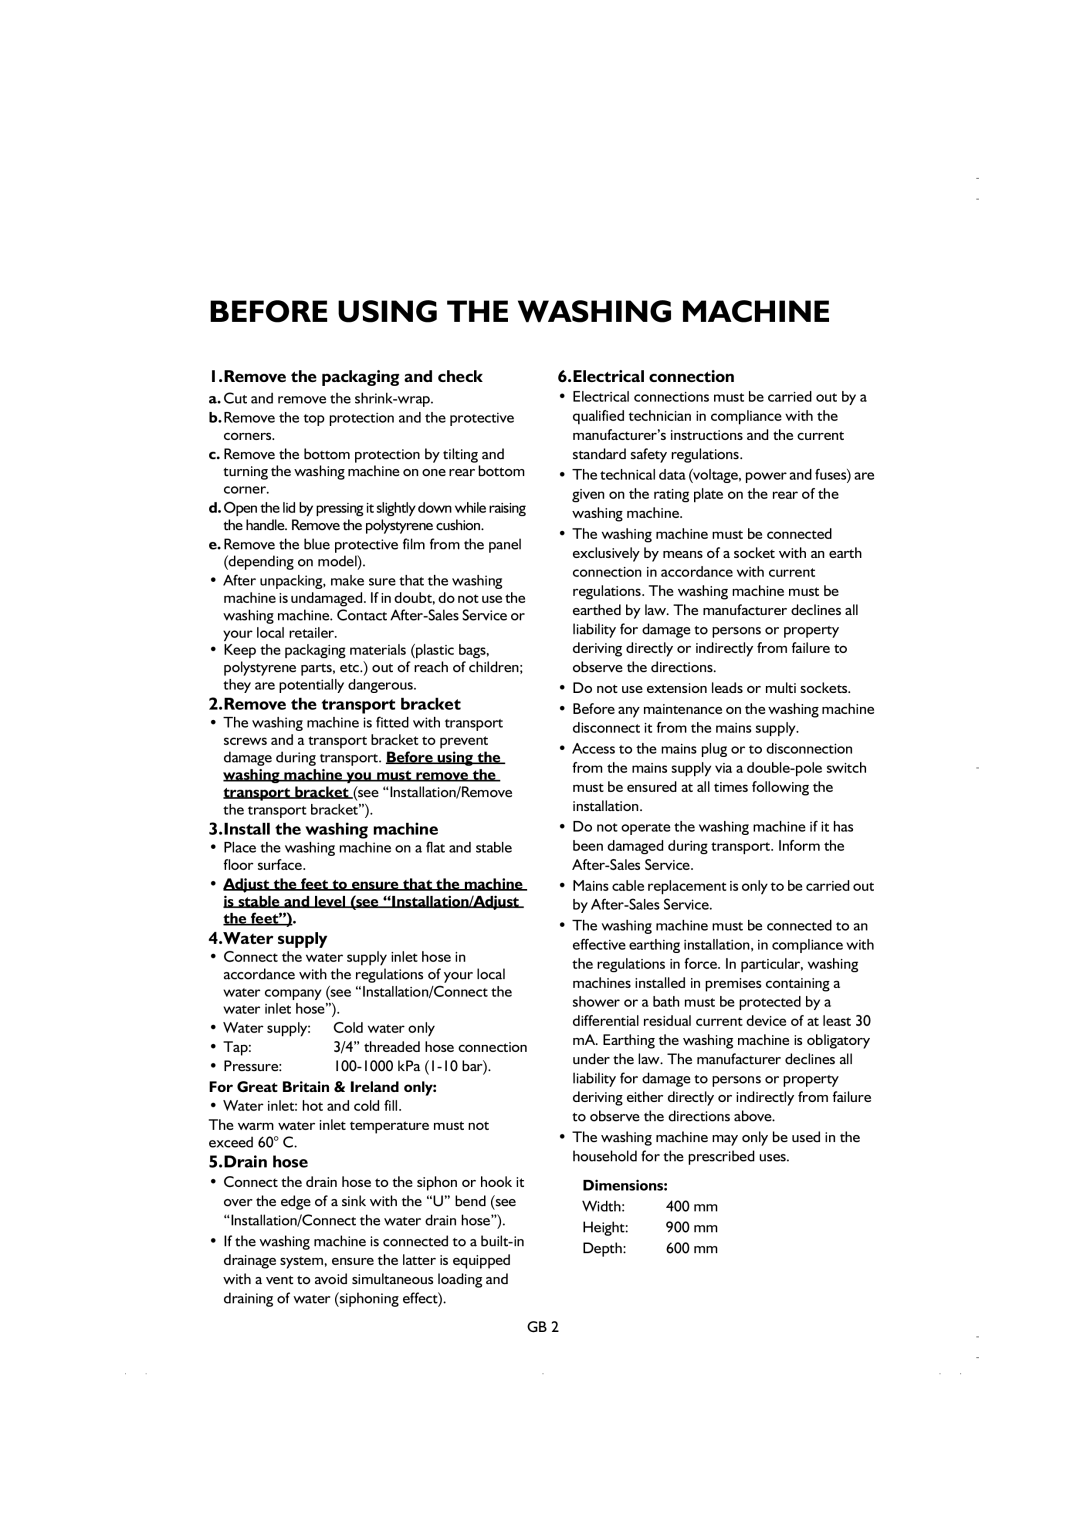 Smeg K600TL1 manual Before Using The Washing Machine, Remove the packaging and check, Electrical connection, Drain hose 